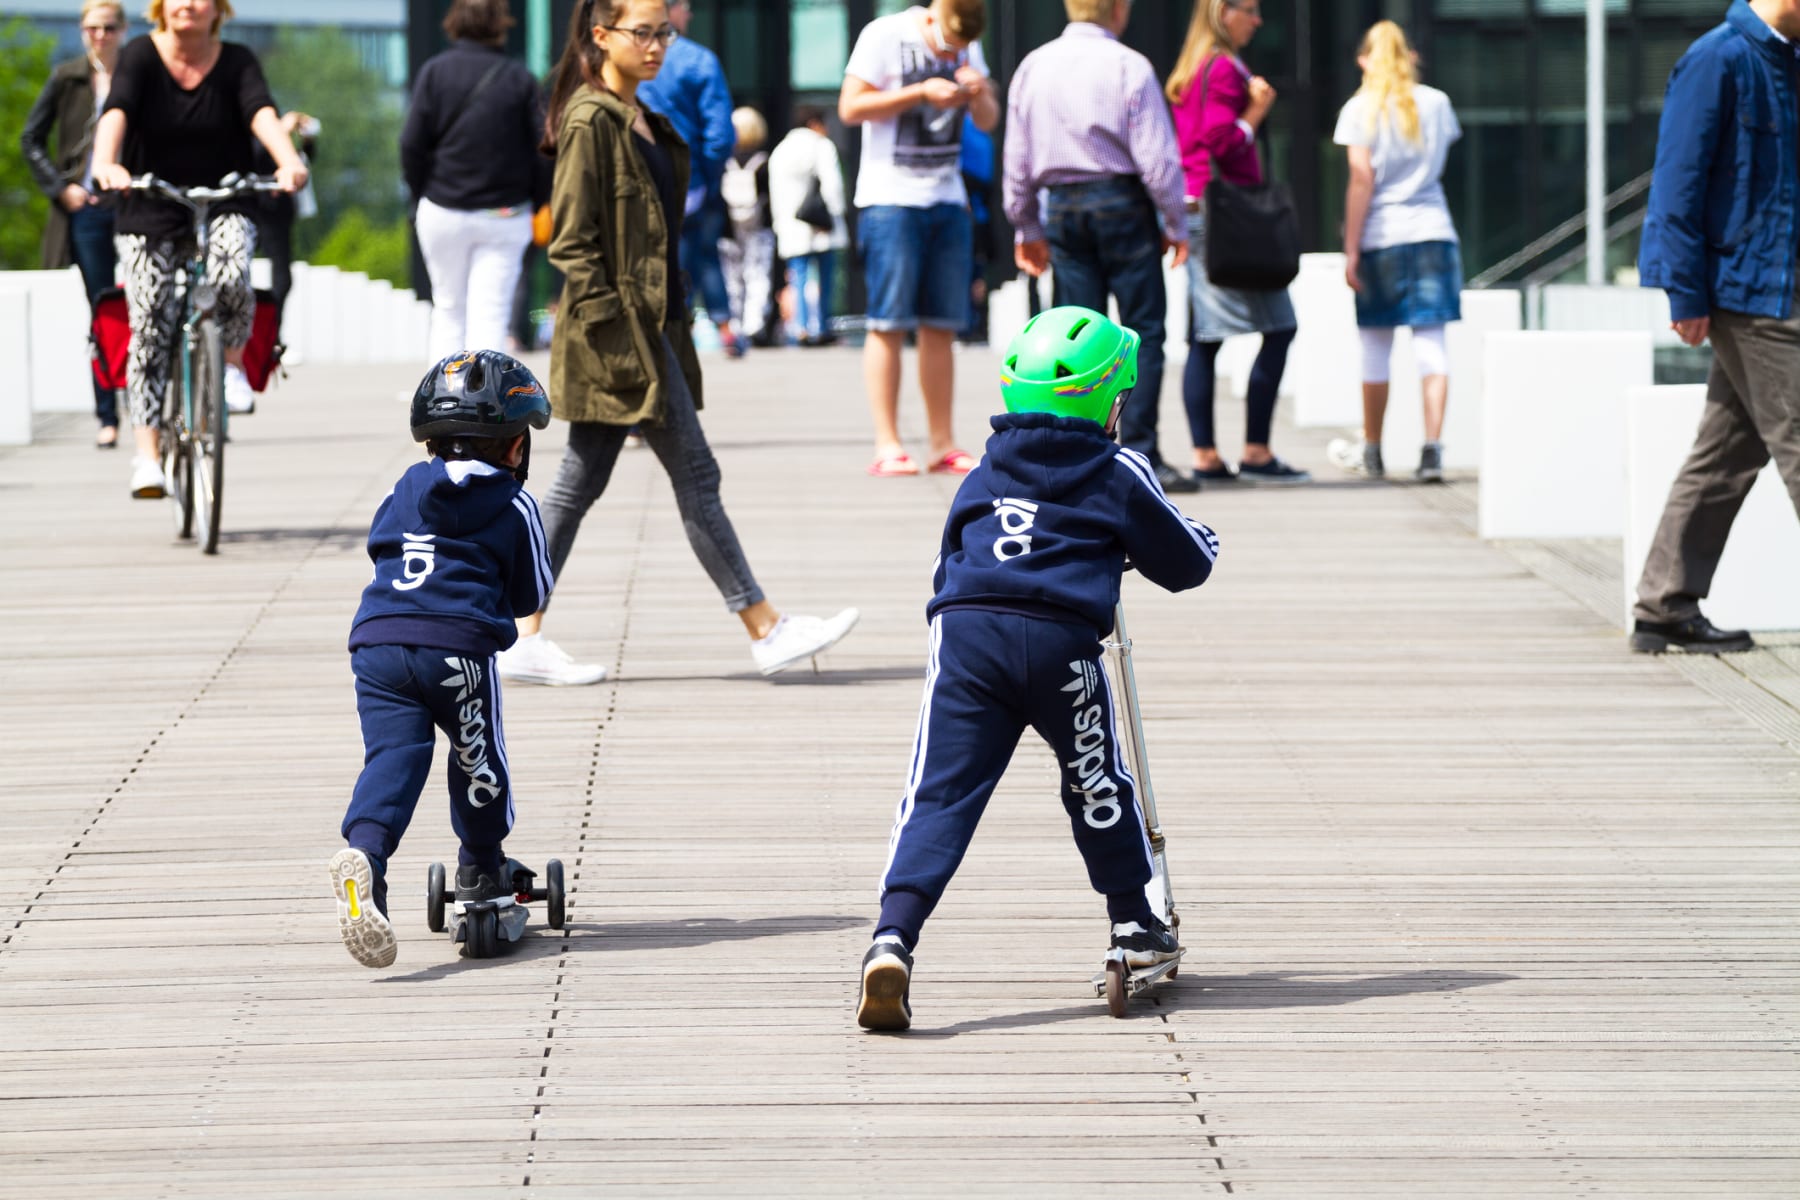 kids in adidas clothing riding scooters